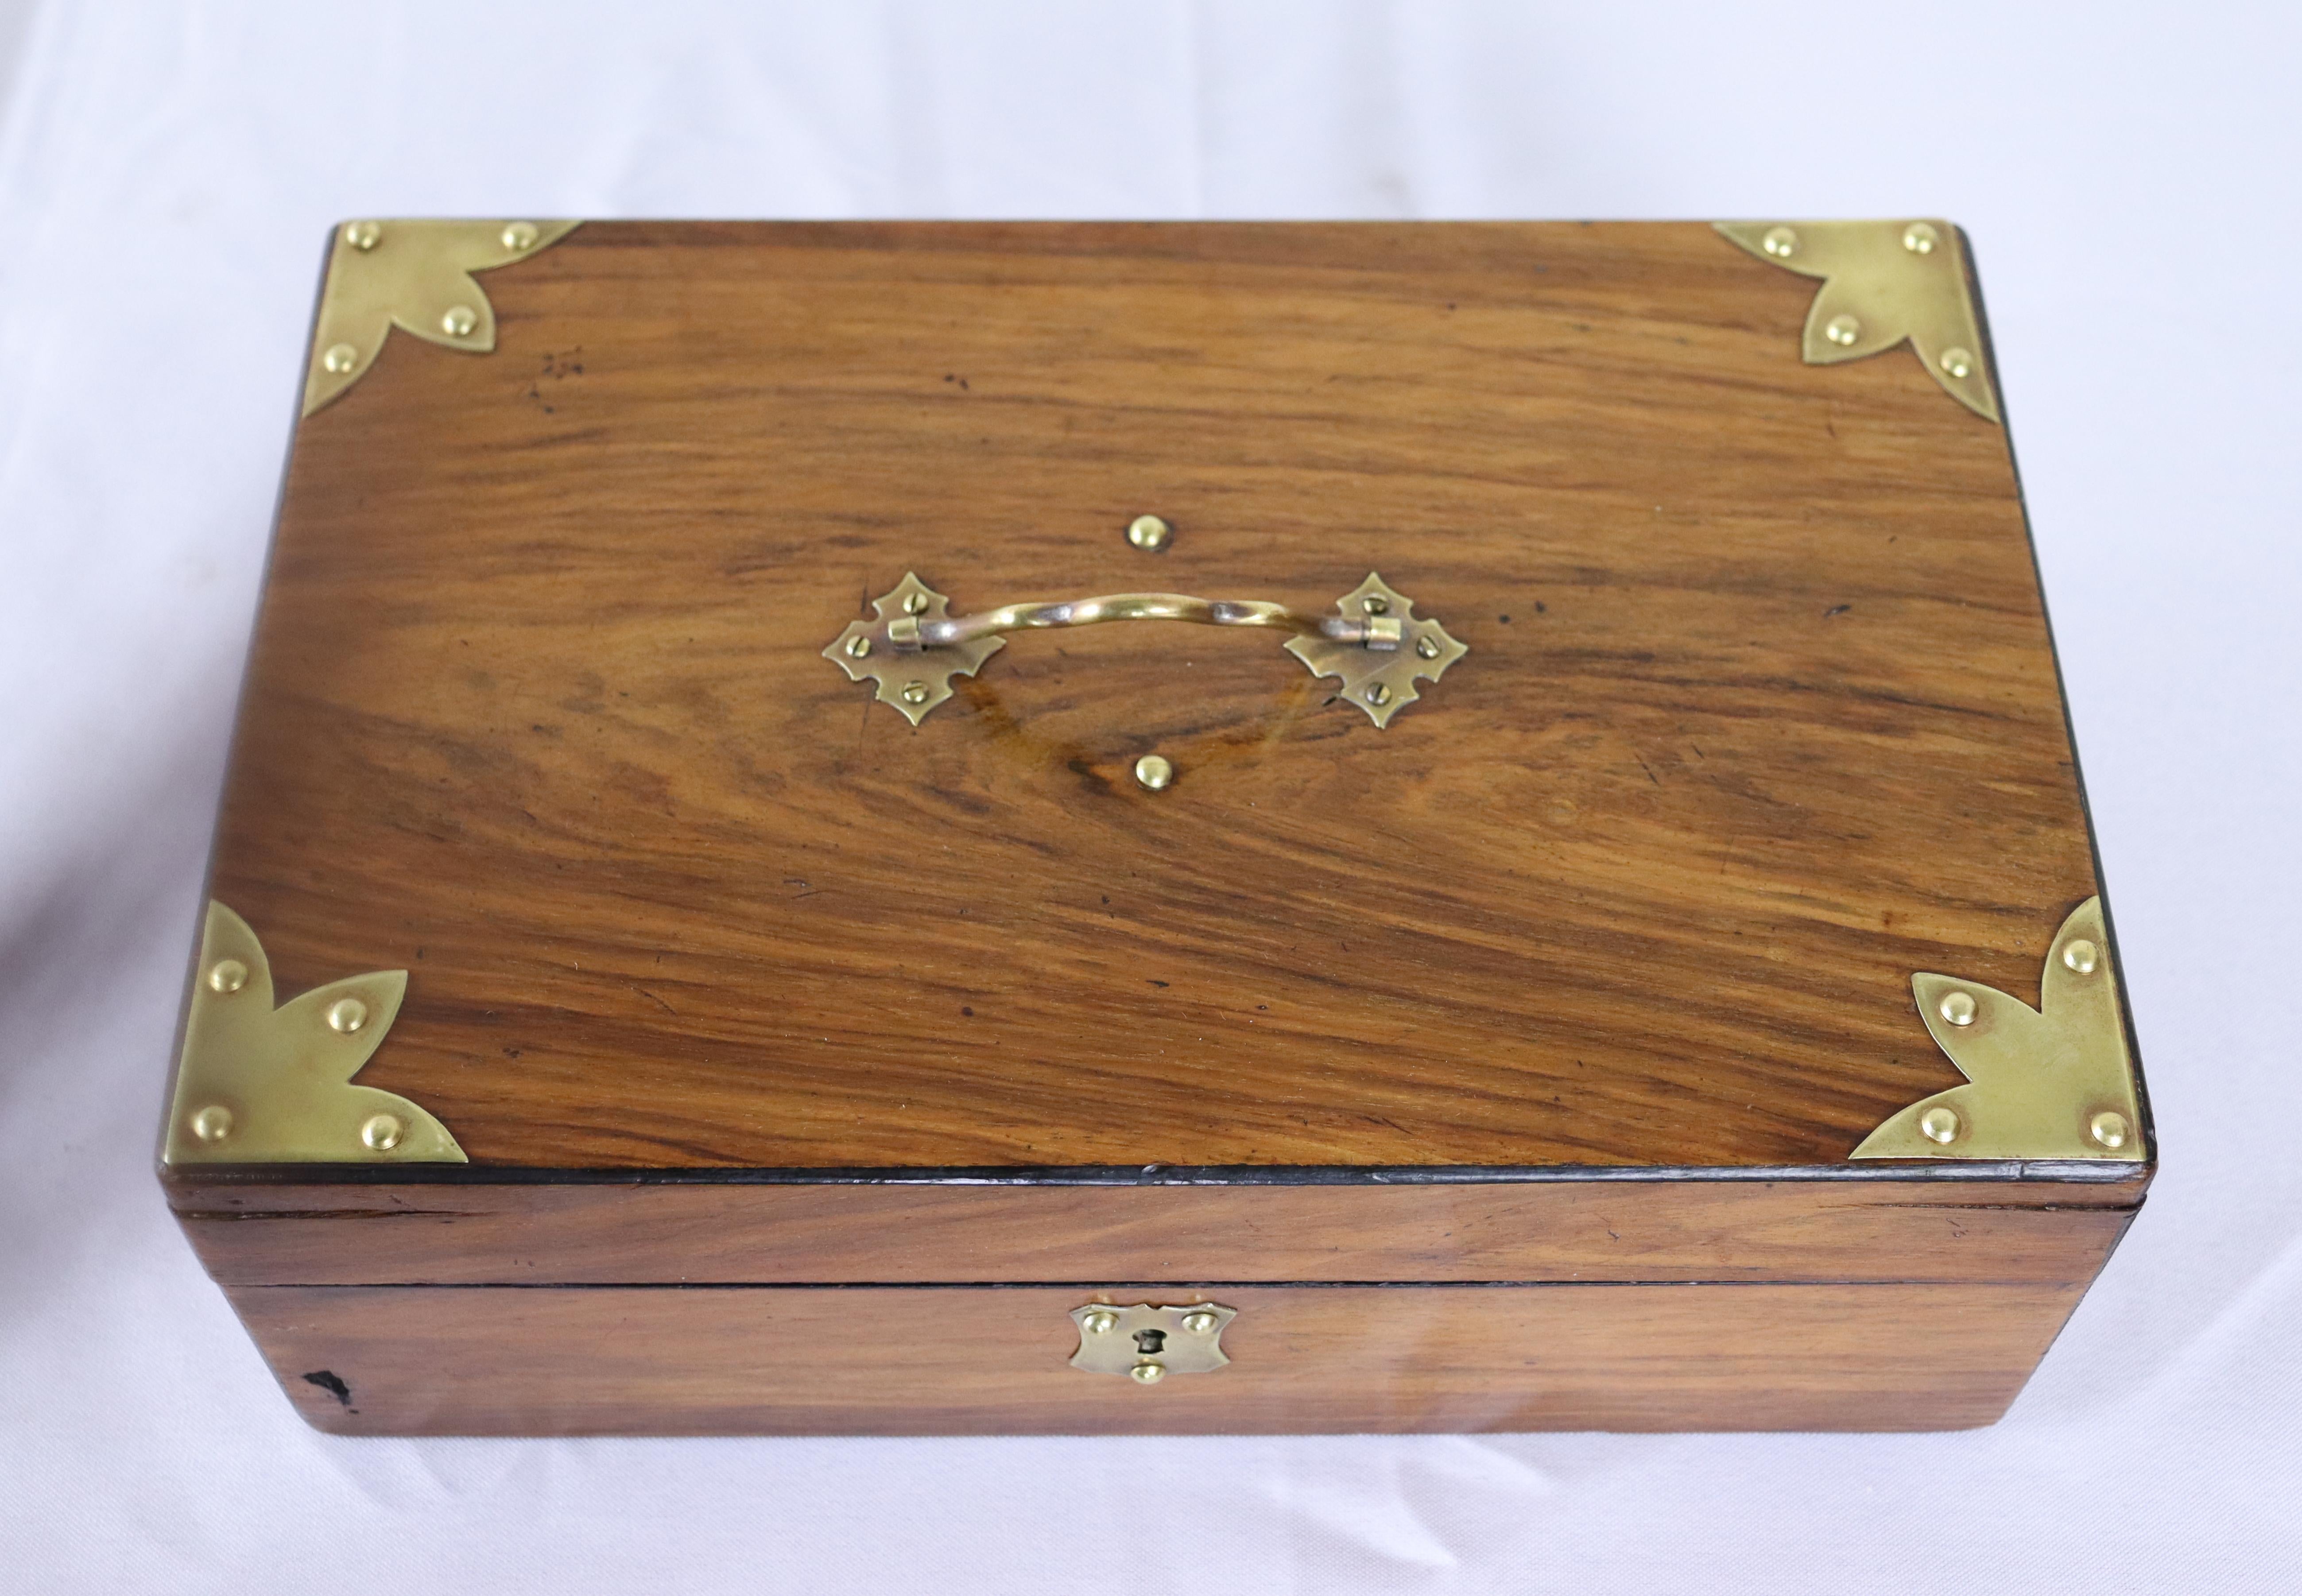 A charming walnut box with good color and patina.  The brass accents are eyecatching and in good condition.